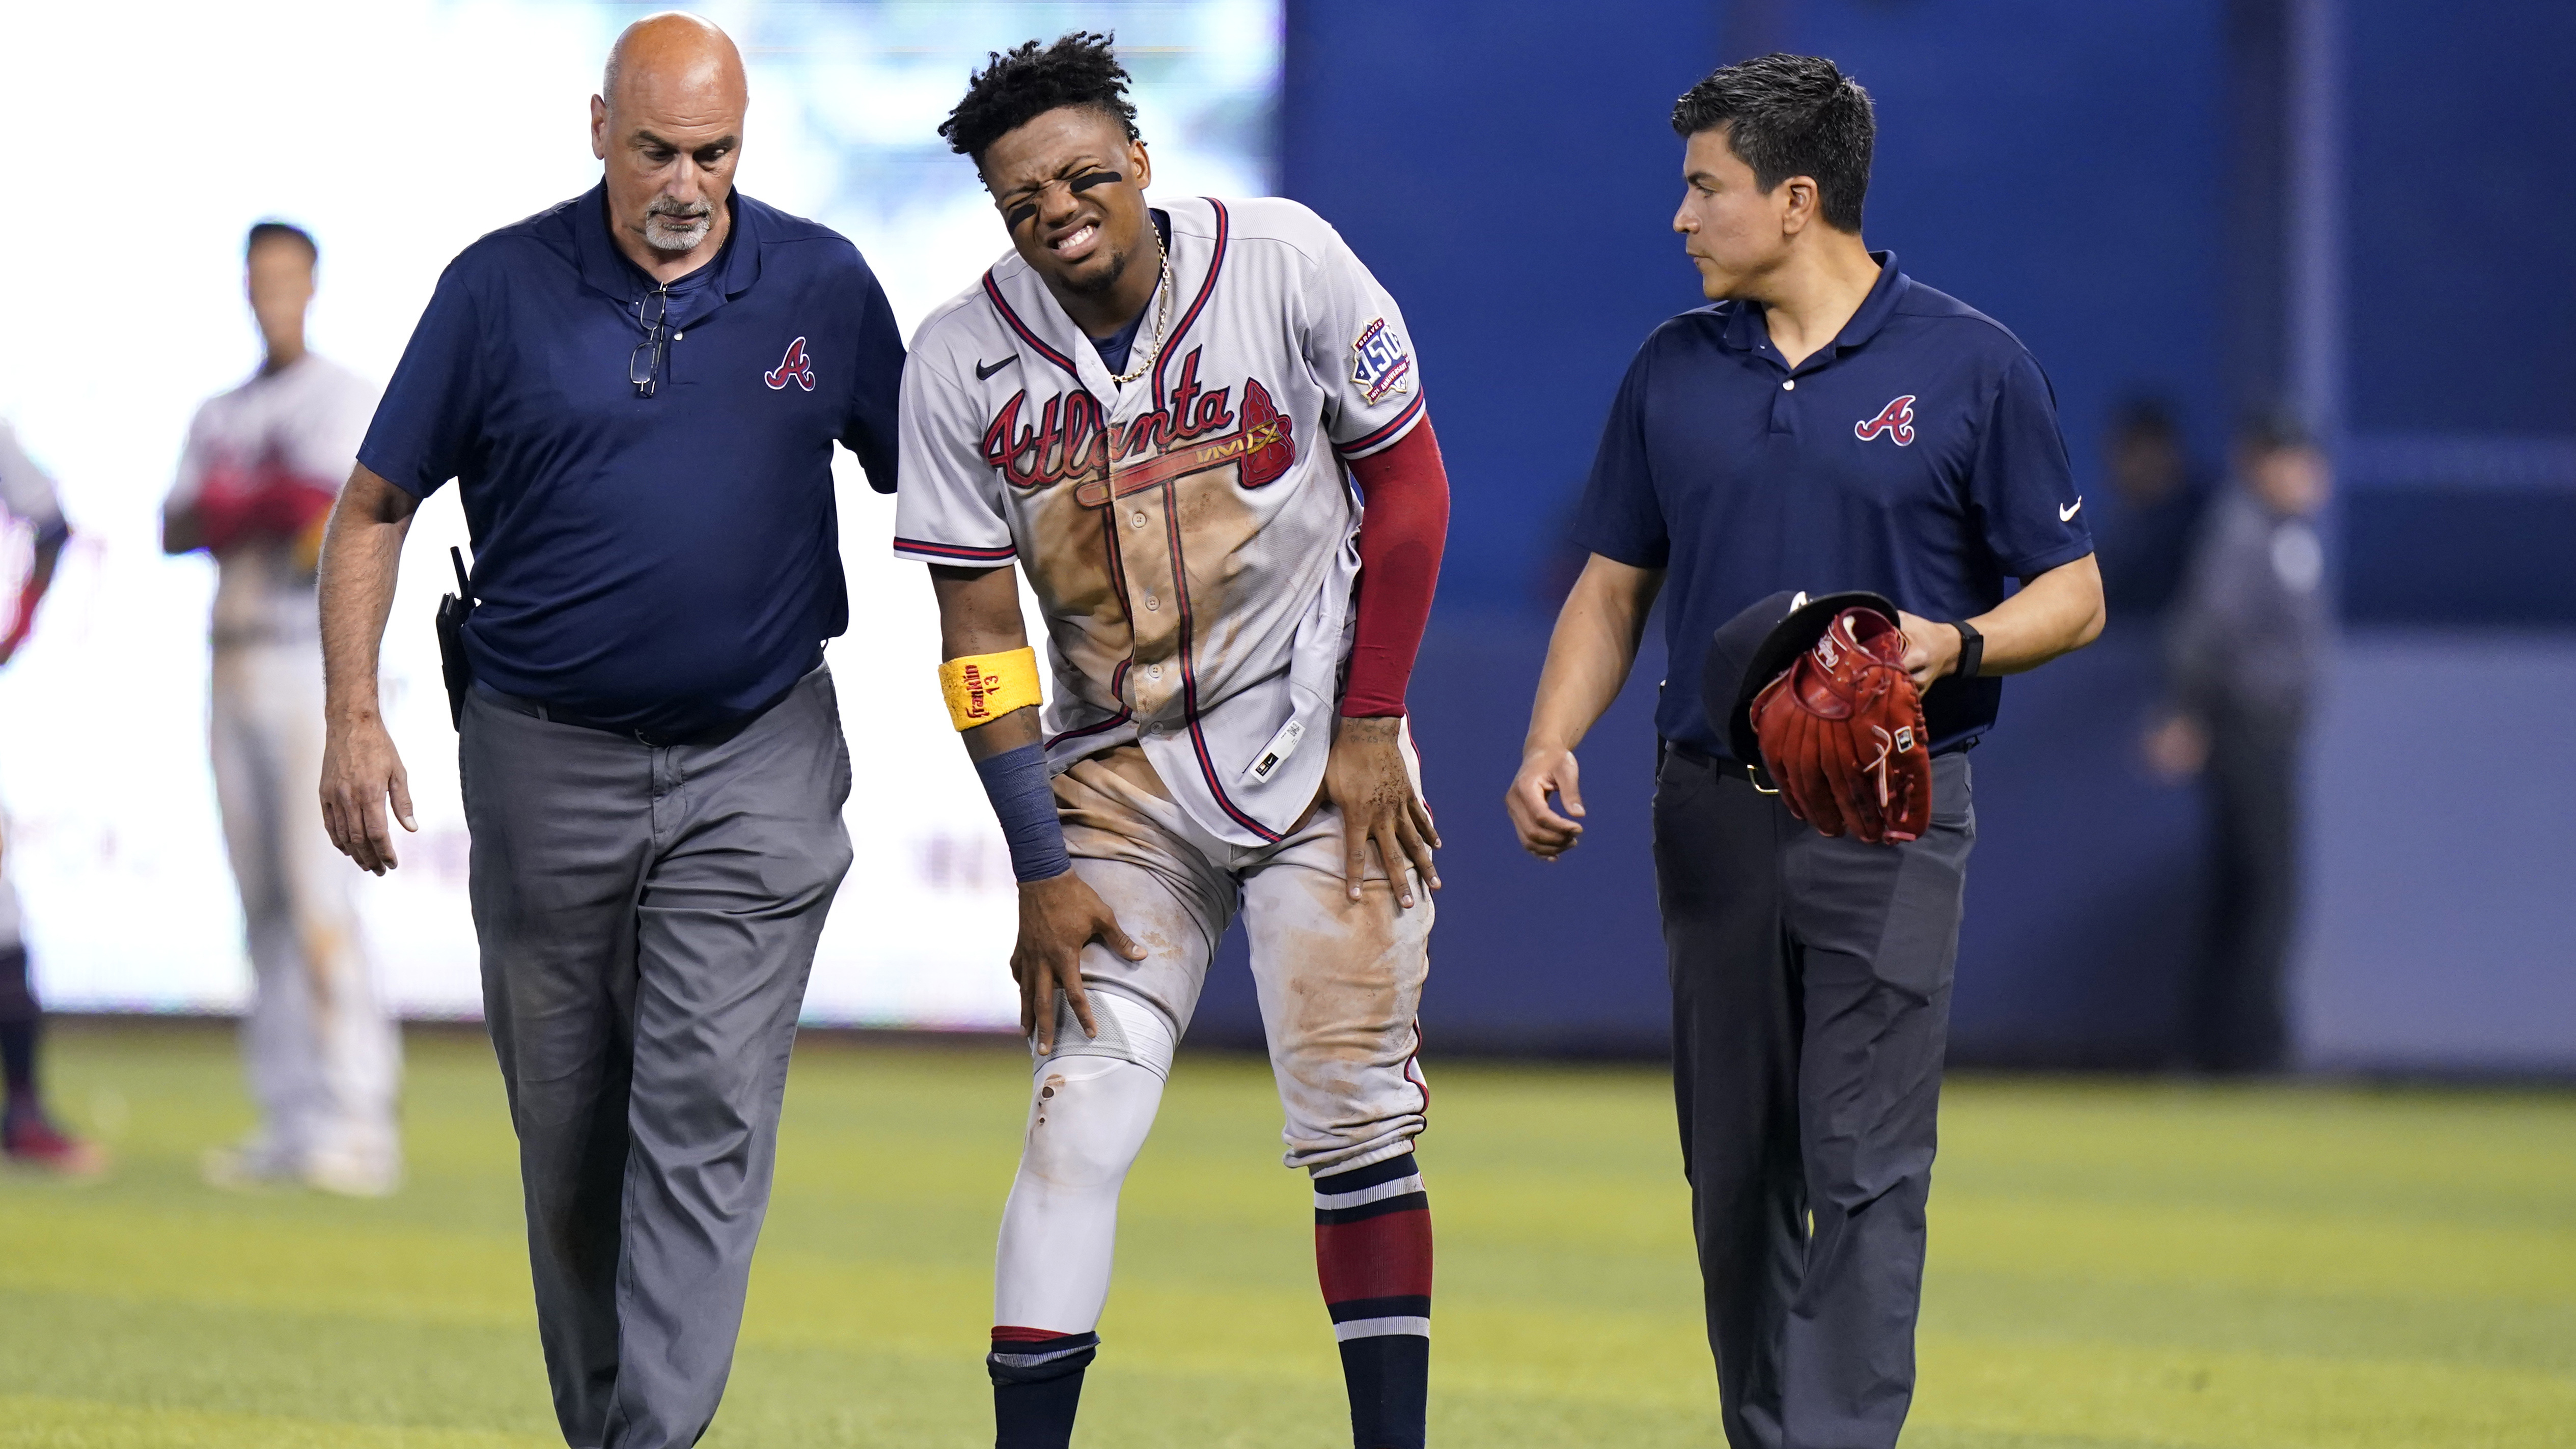 Freddie Freeman - Ronald Acuna Jr. clashes started Acuna's rookie year